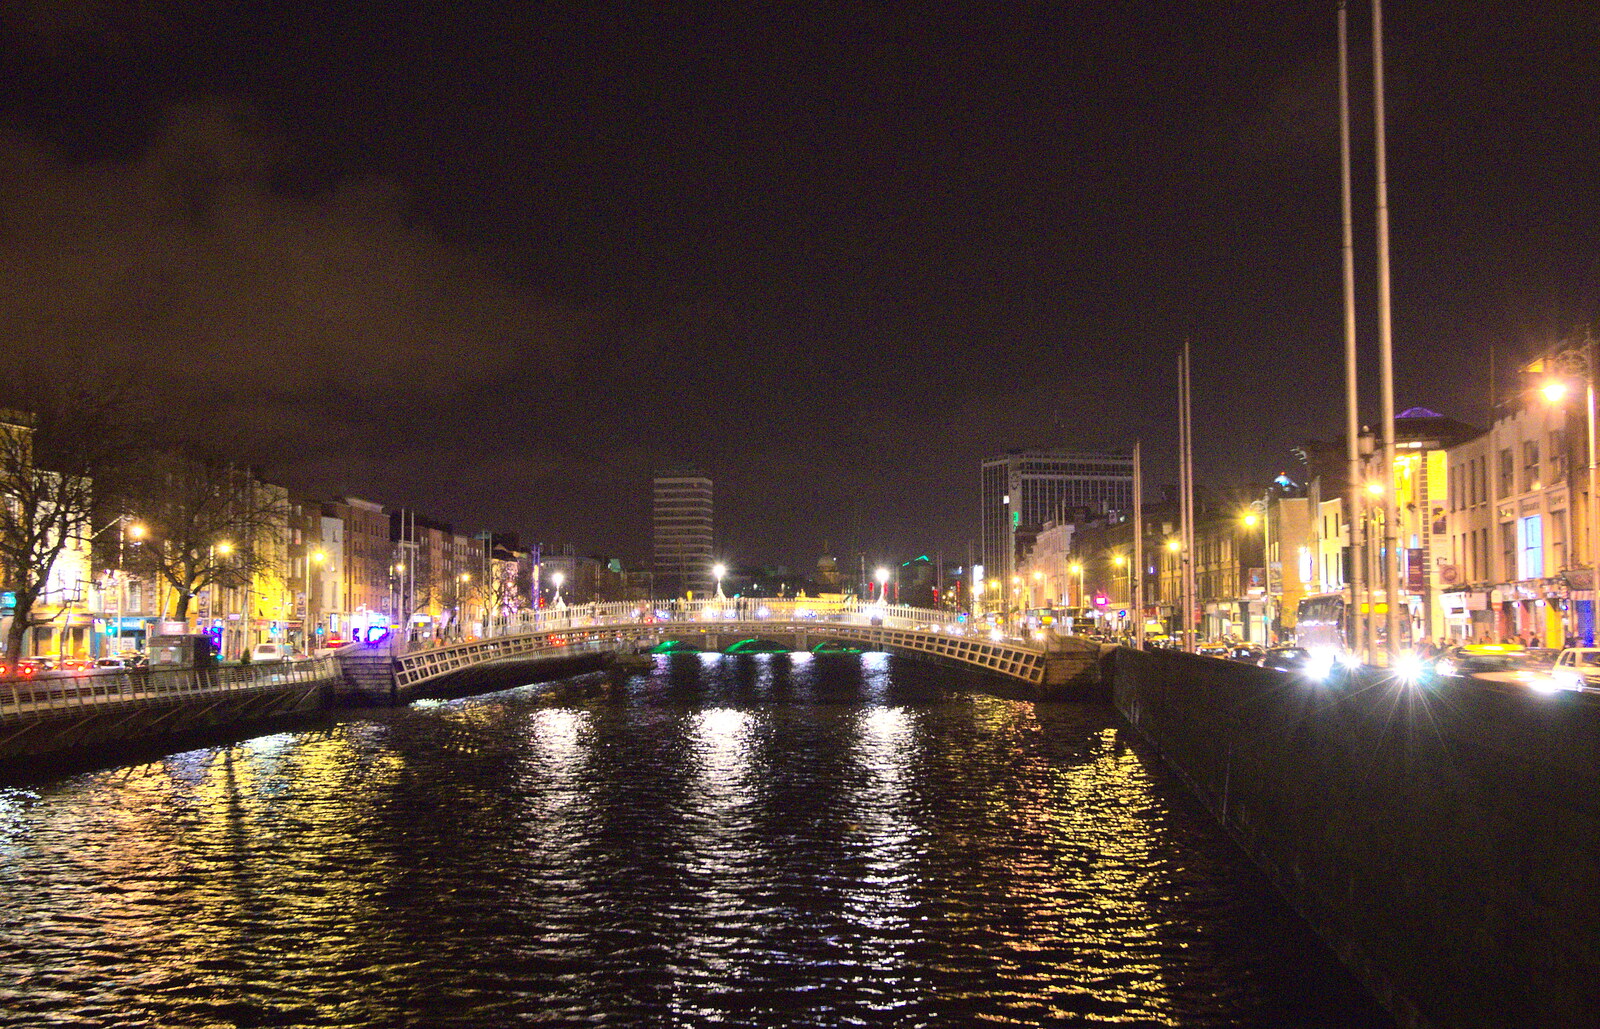 A scene on the Liffey from A Night on the Lash, Dublin, Ireland - 14th December 2012